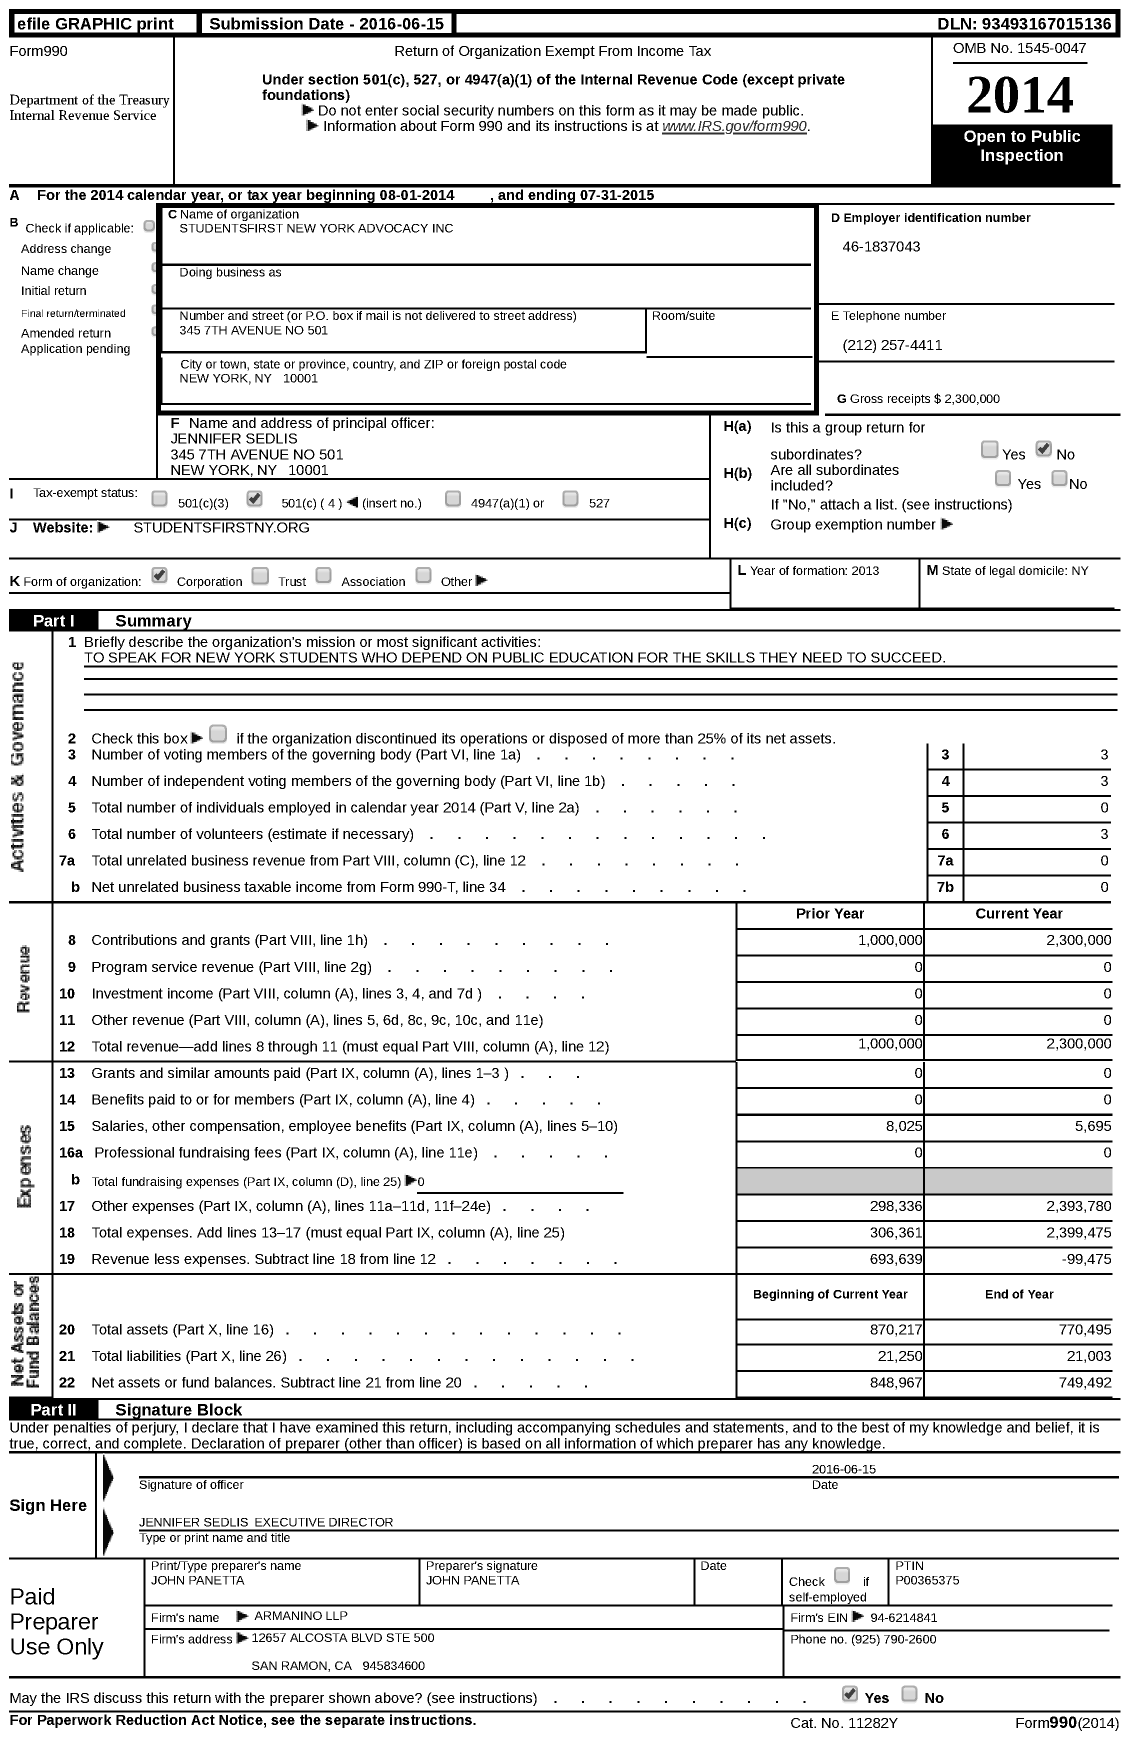 Image of first page of 2014 Form 990 for StudentsFirst New York Advocacy